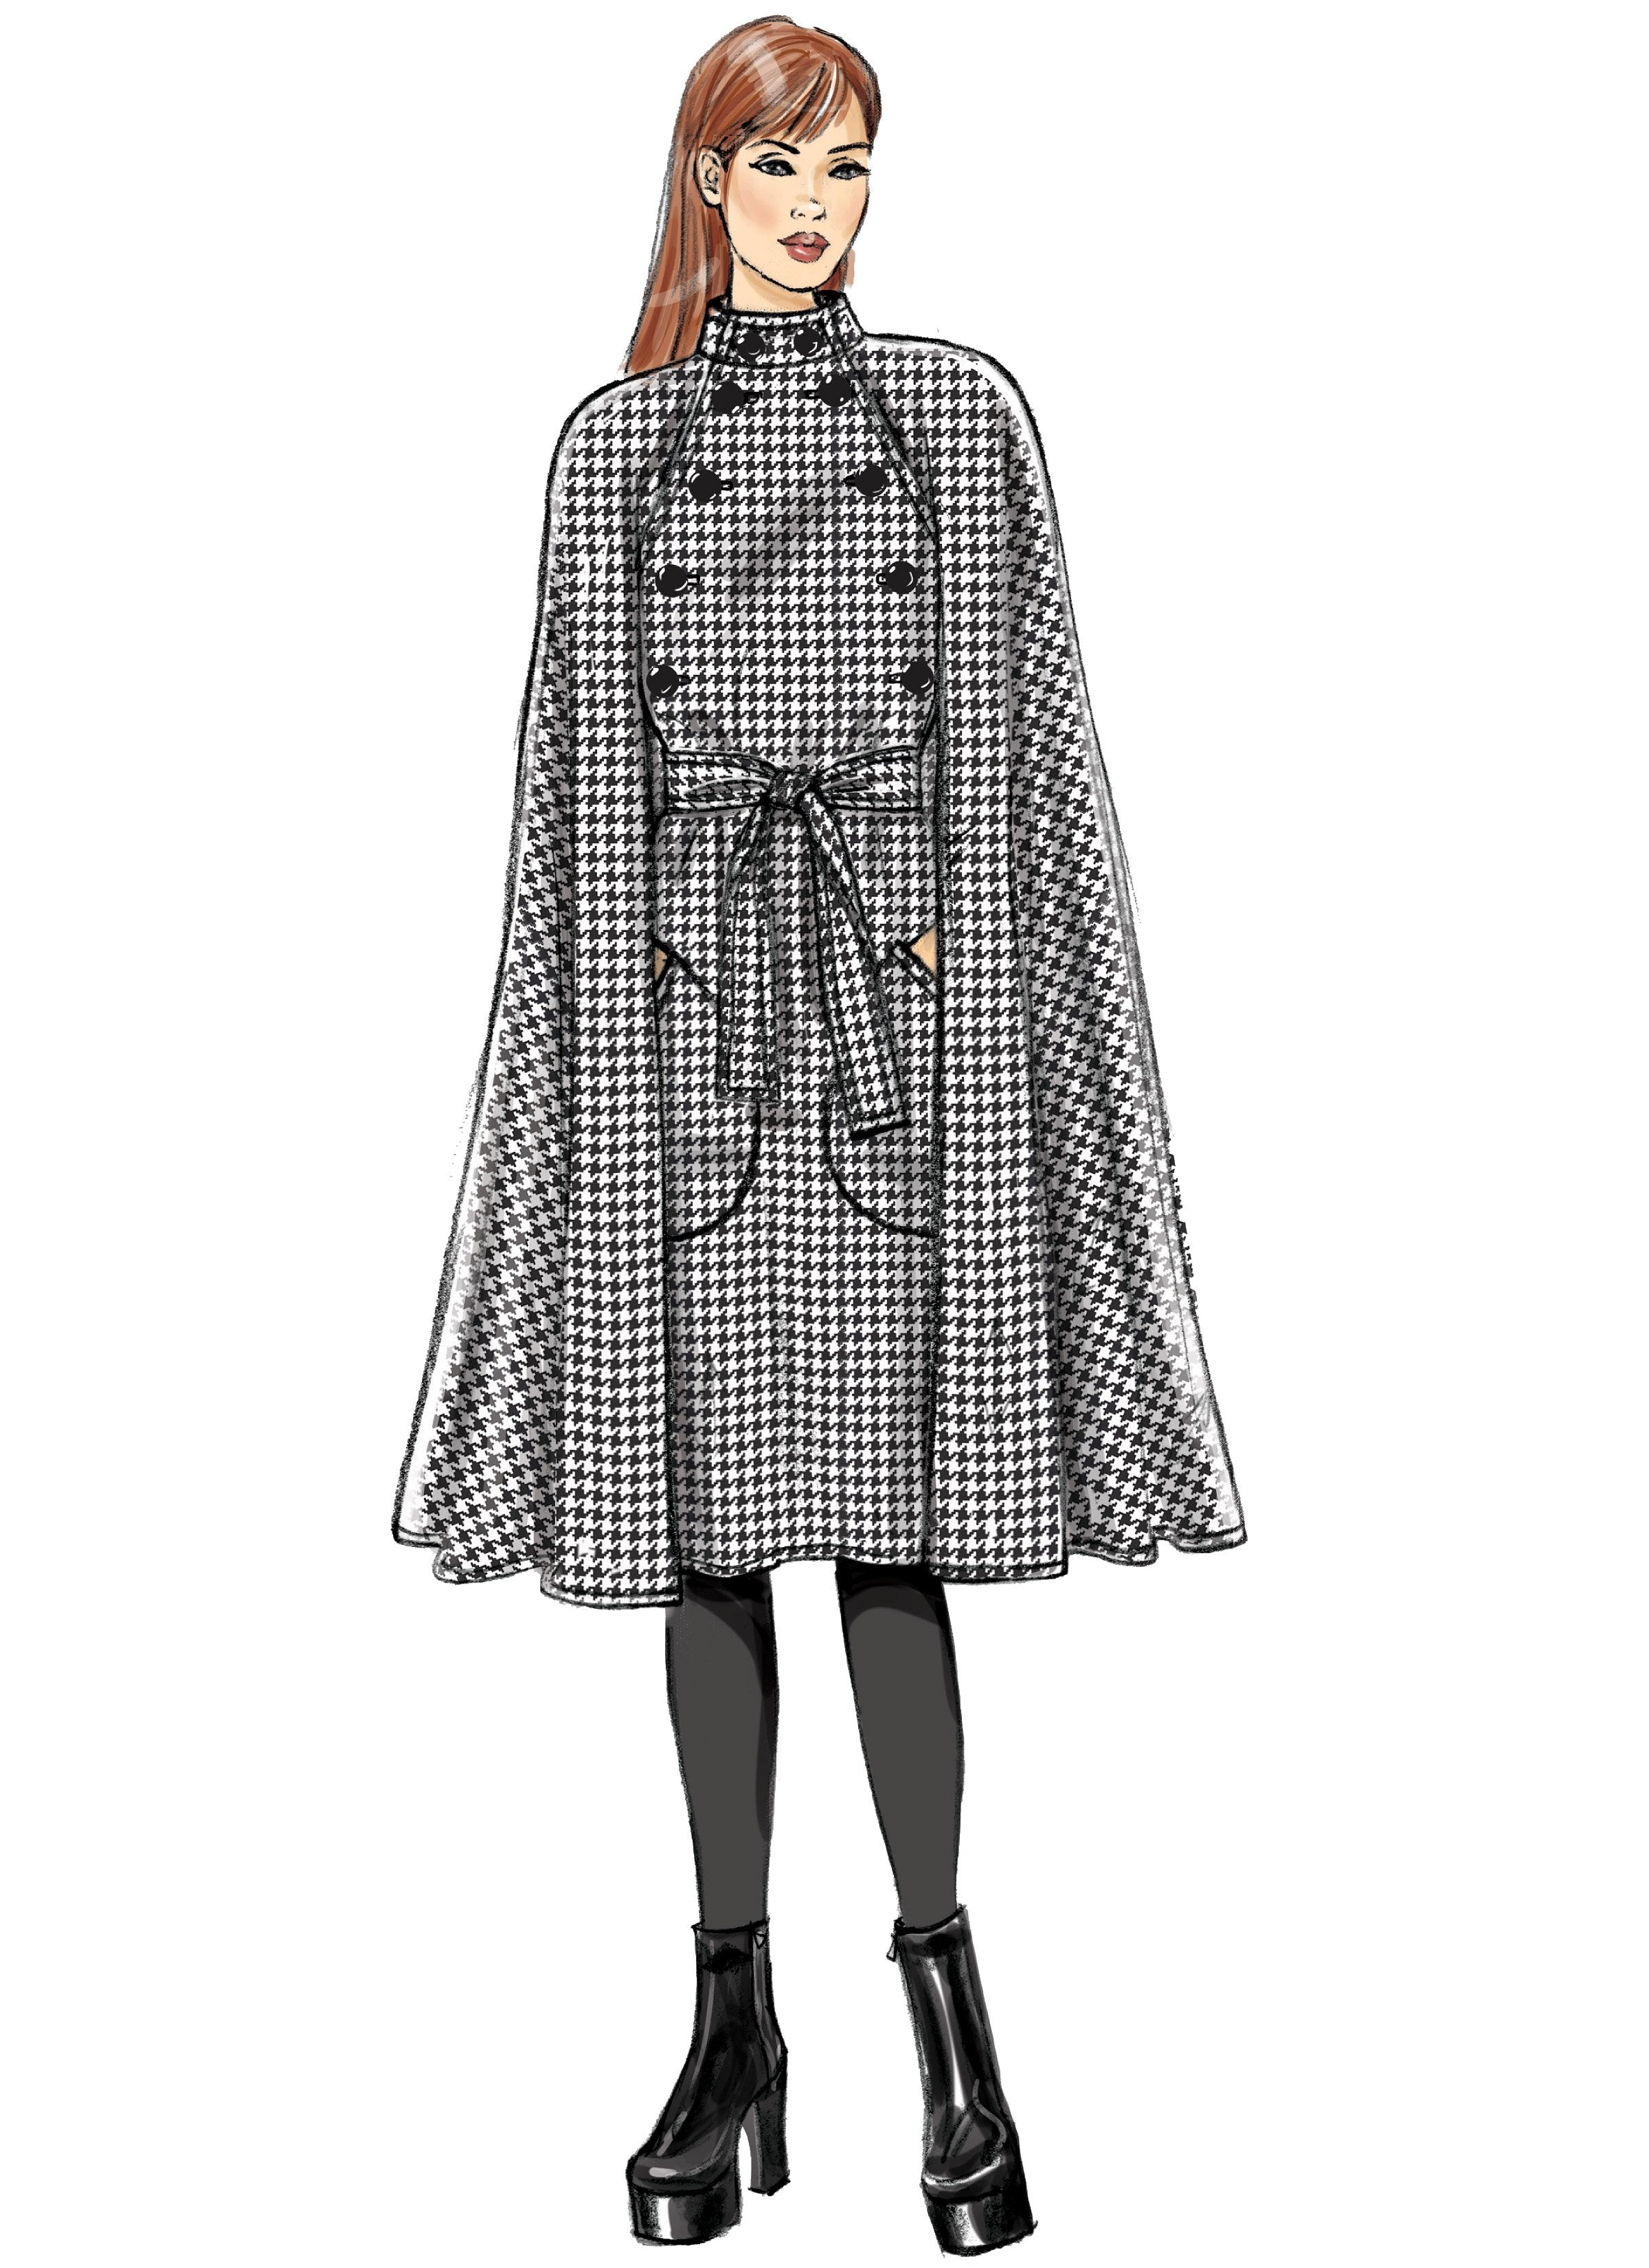 Vogue Pattern 9288 Cape with Stand Collar, Pockets, and Belt from Jaycotts Sewing Supplies